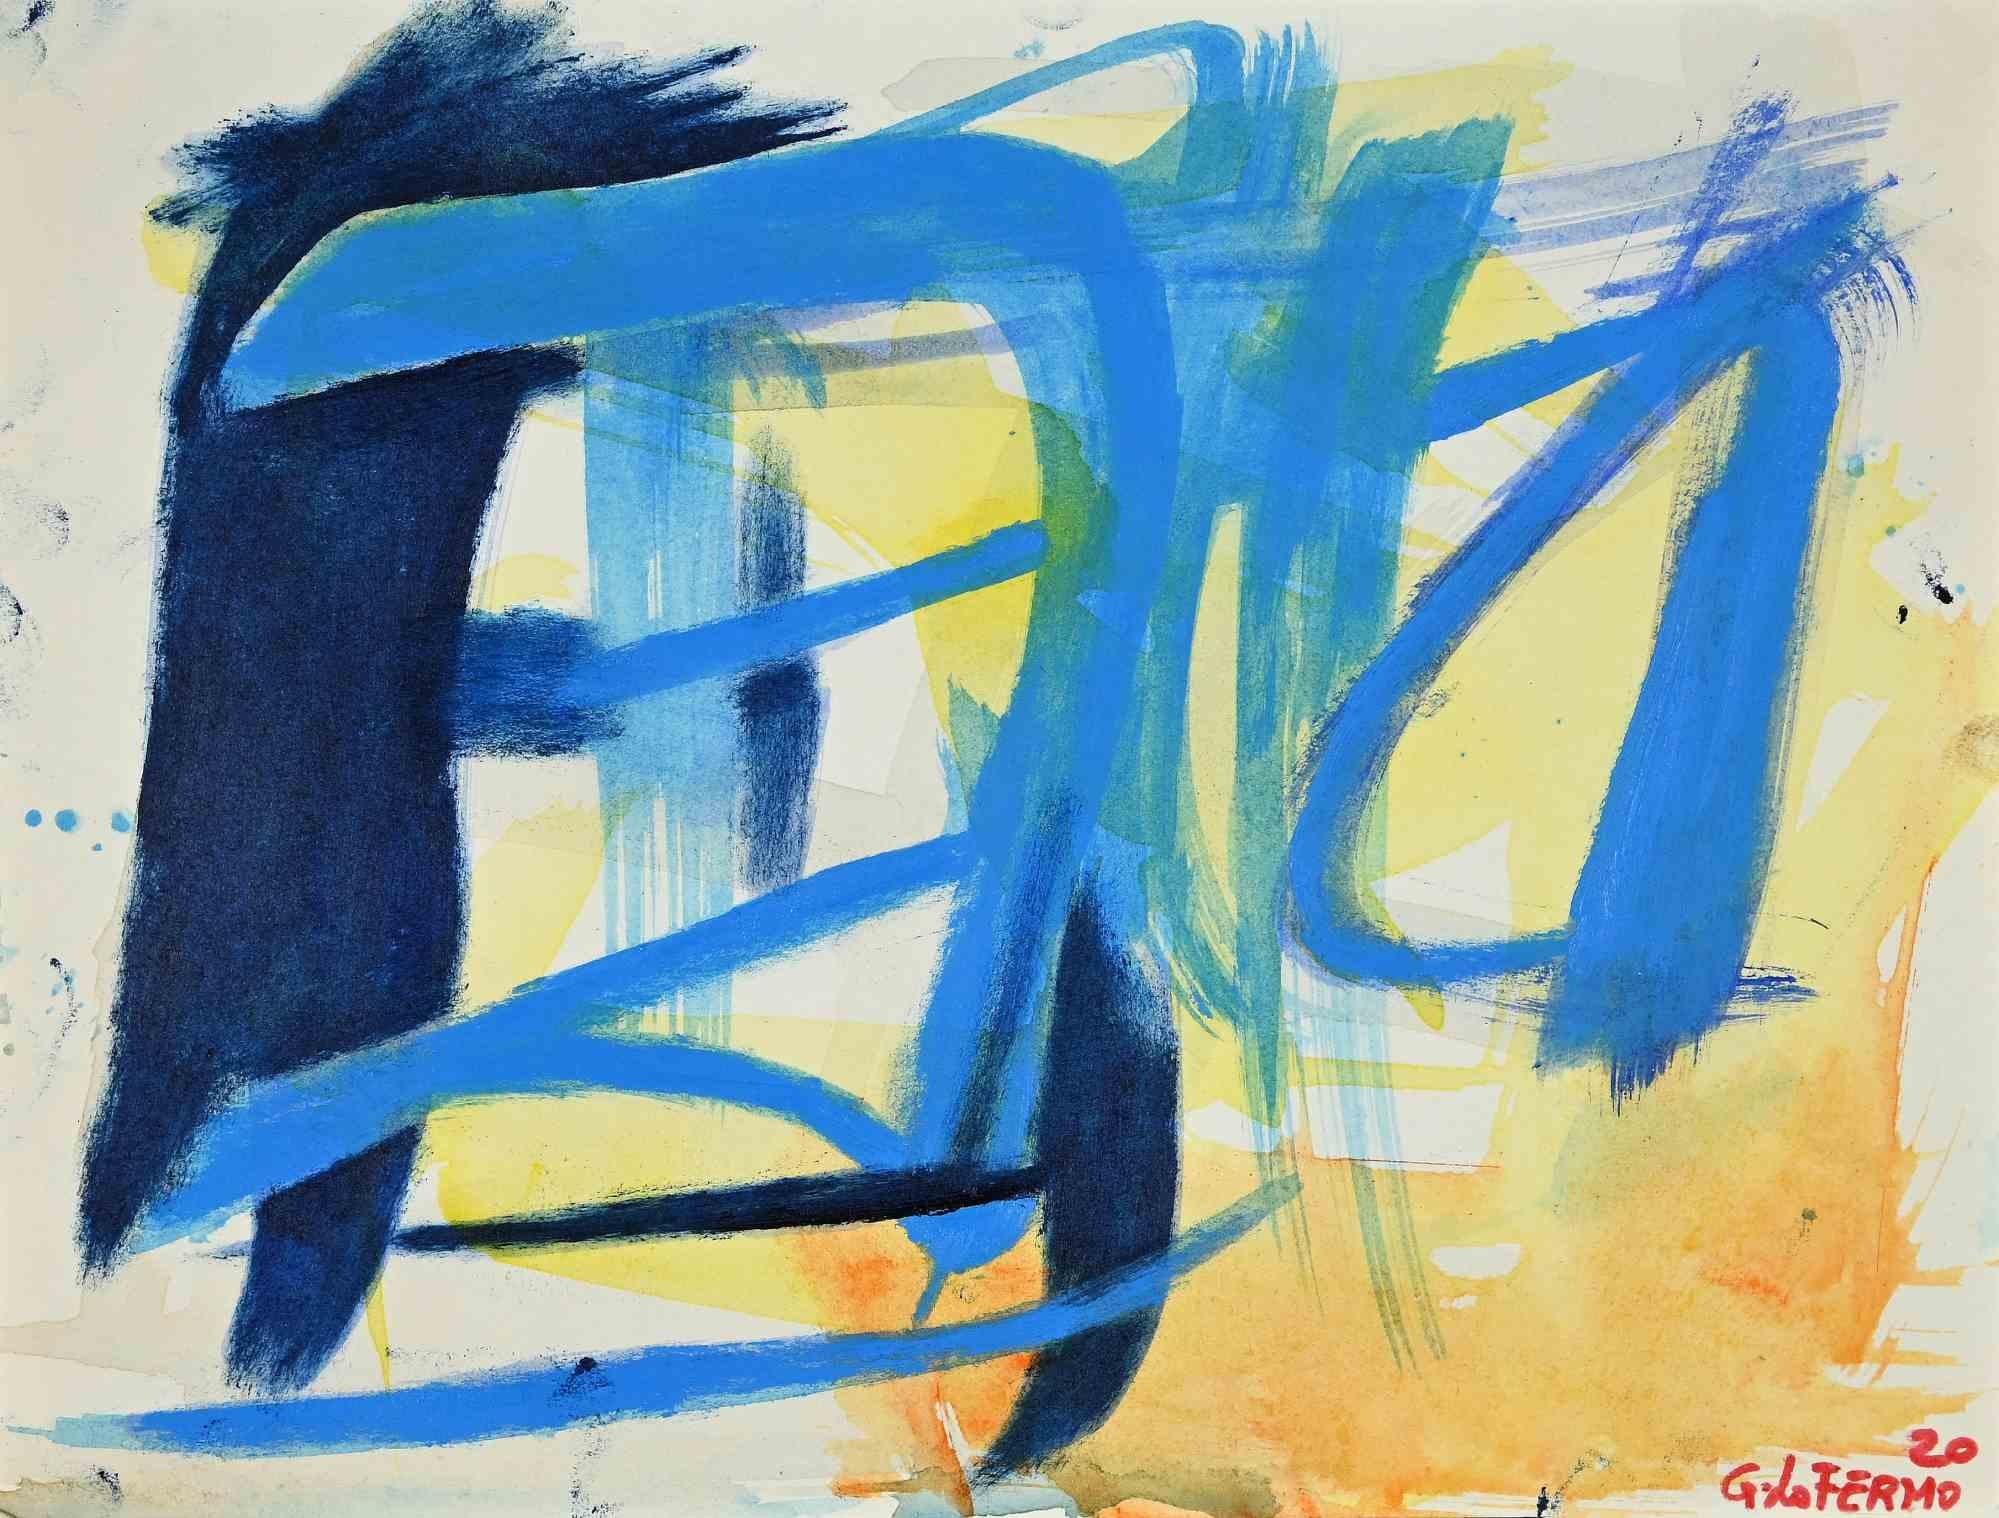 Abstract Composition is an original drawing in Tempera and Watercolor on paper realized by Giorgio Lo Fermo.

Good Conditions.

The Artwork is Depicted through strong strokes in a well-balanced composition.

 

Giorgio Lo Fermo  is an Italian